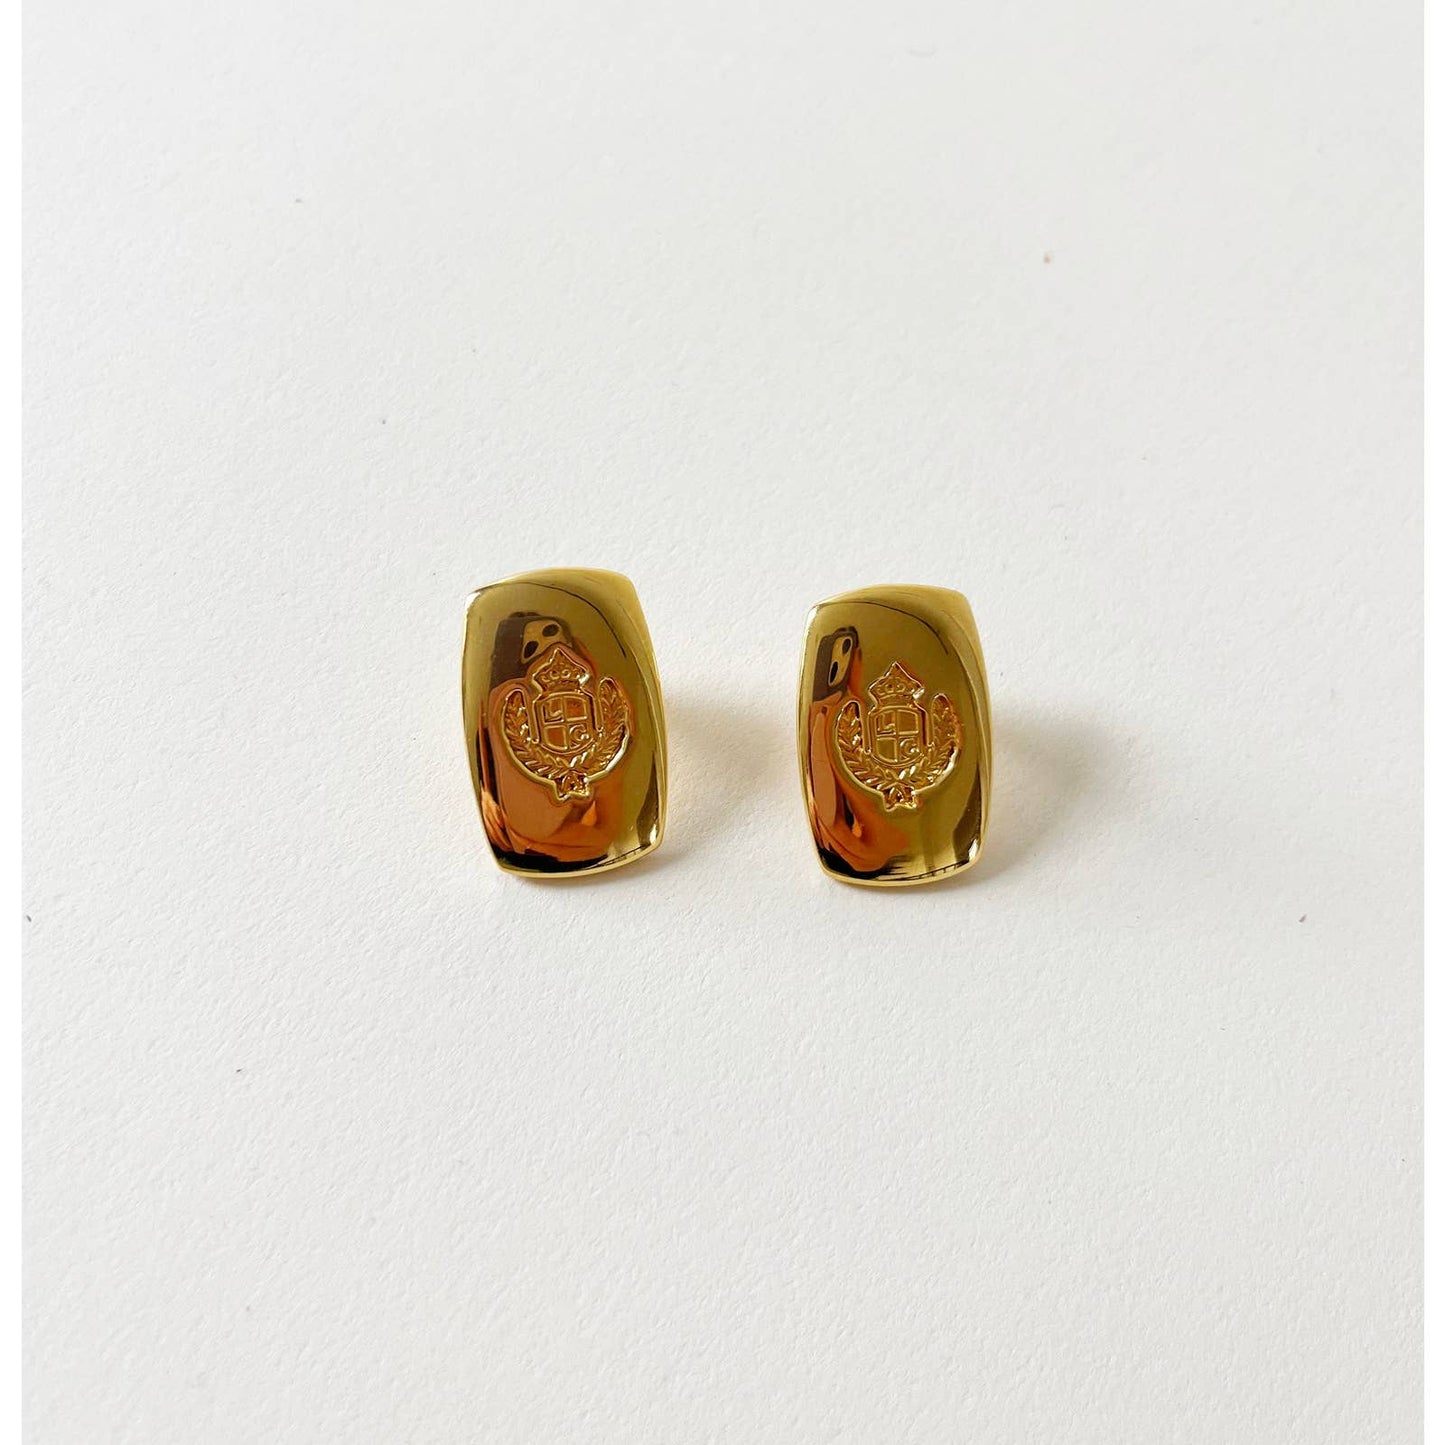 Vintage 90s Gold Statement Earrings w/ Crest